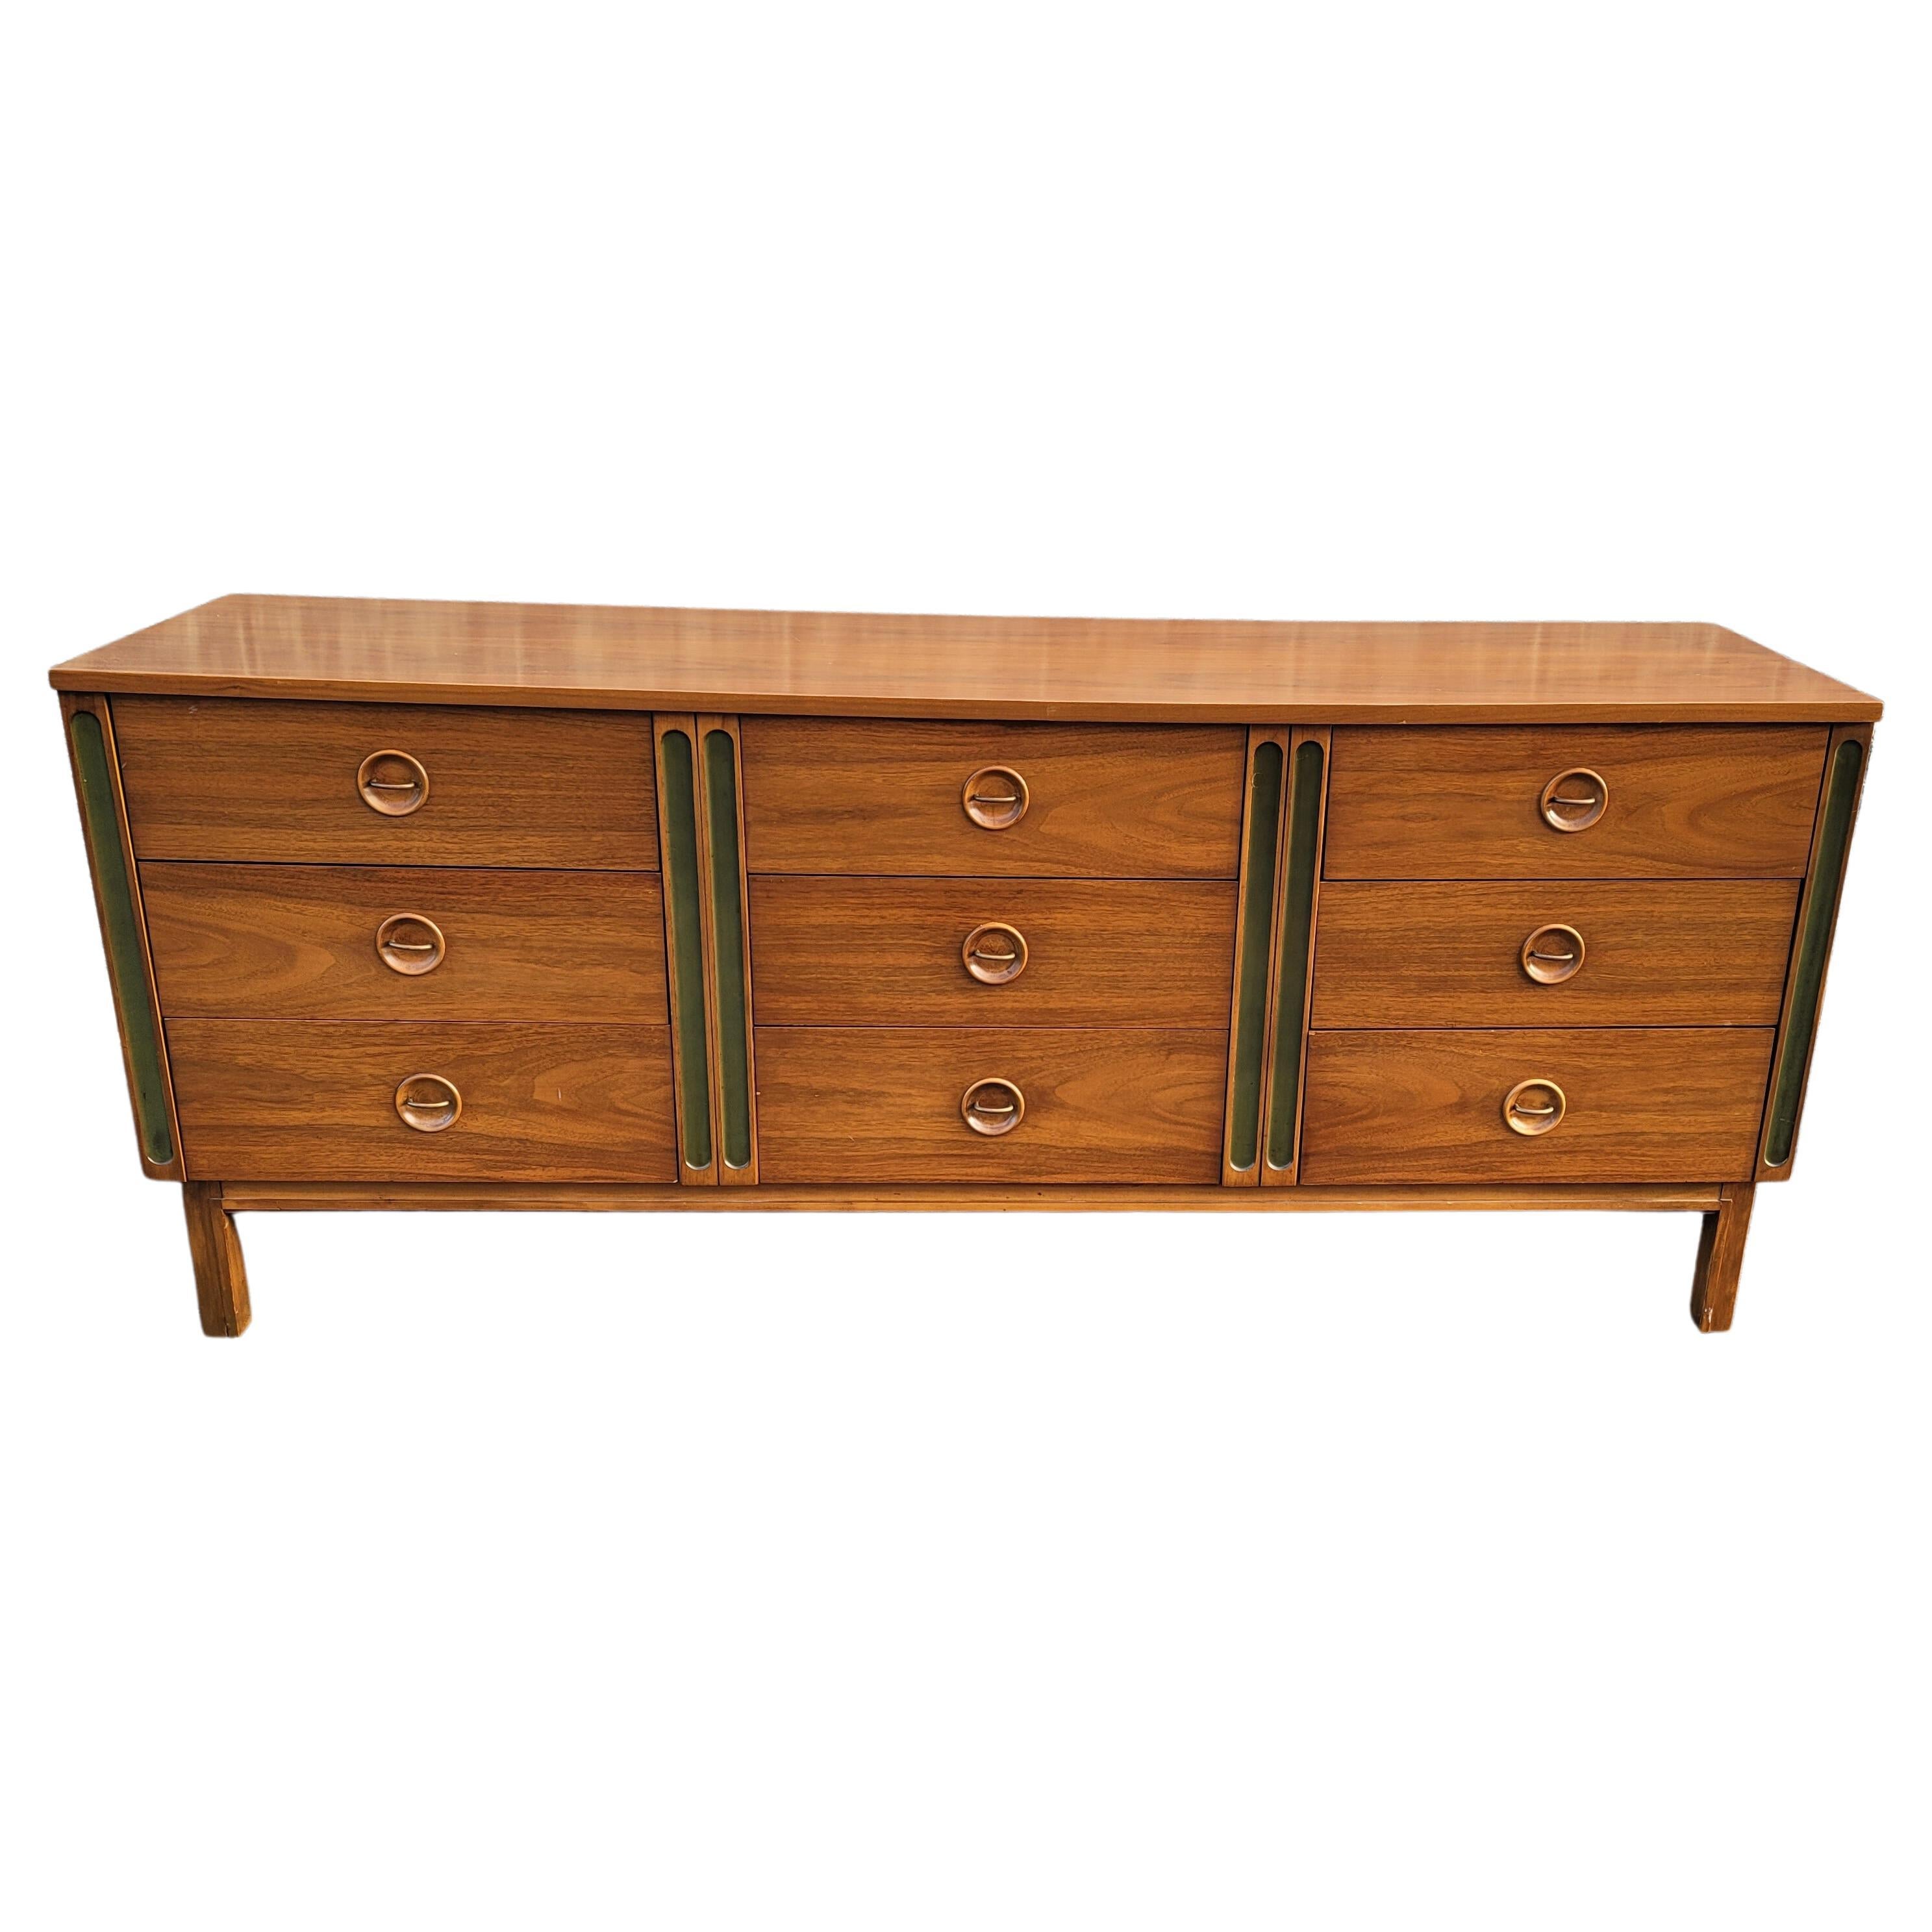 A rare danish teak dresser by Arne Vodder for Sibast Mobelfabrik, 1950s. This elegant Danish Modern nine-drawer triple dresser is in very good vintage condition. Would look great in any Mid-Century Modern home or apartment. Very well made and